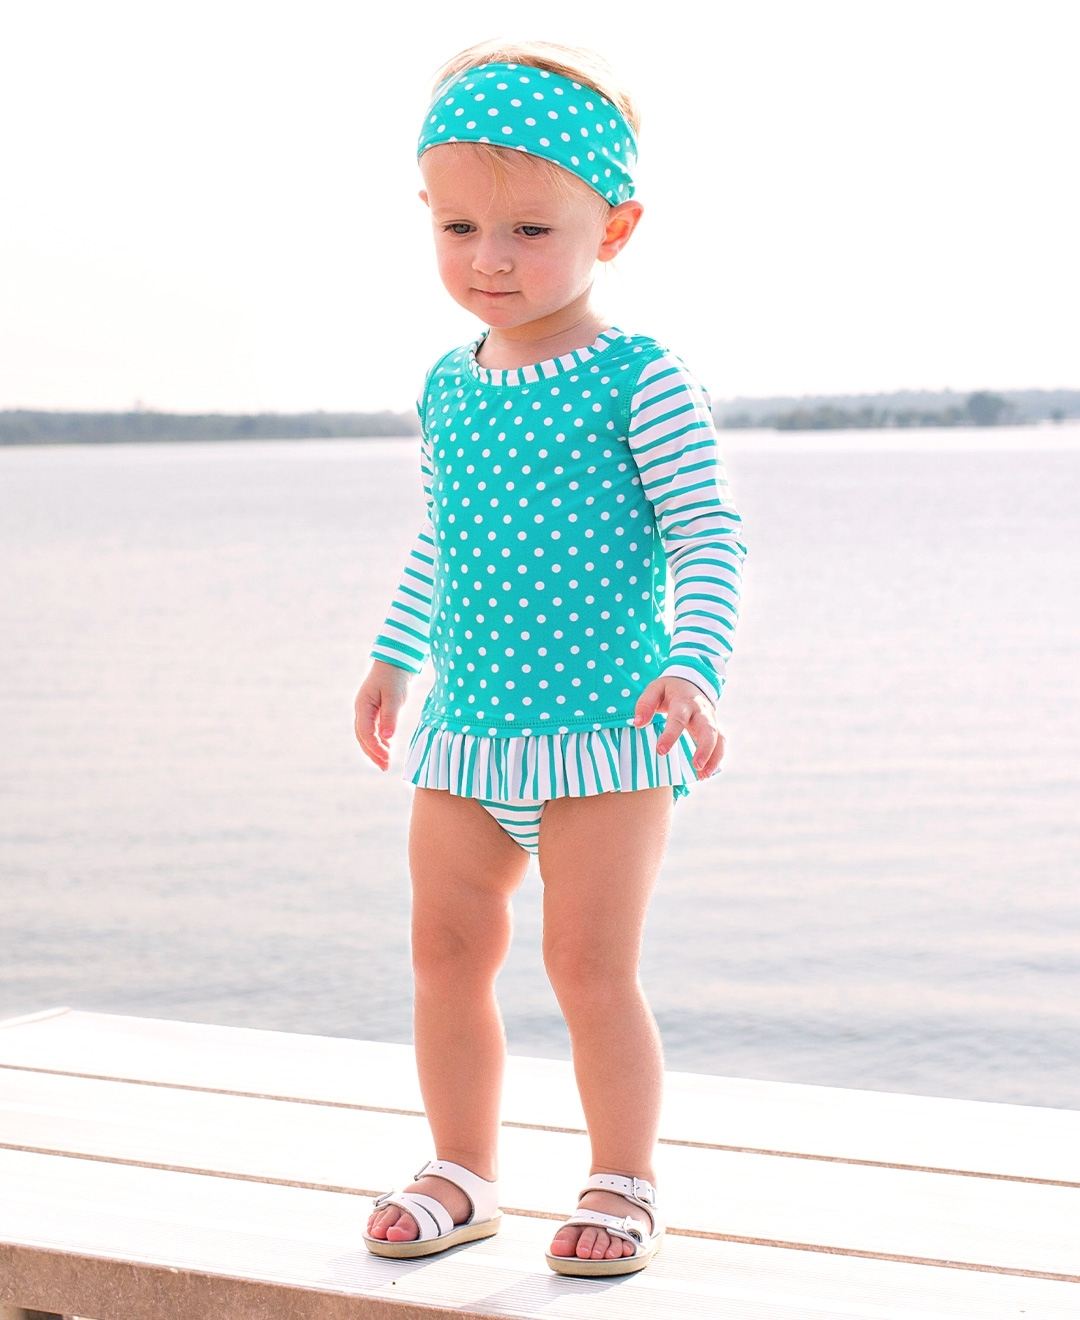 Sun Protection RuffleButts® Baby/Toddler Girls Long Sleeve One Piece Swimsuit with UPF 50 